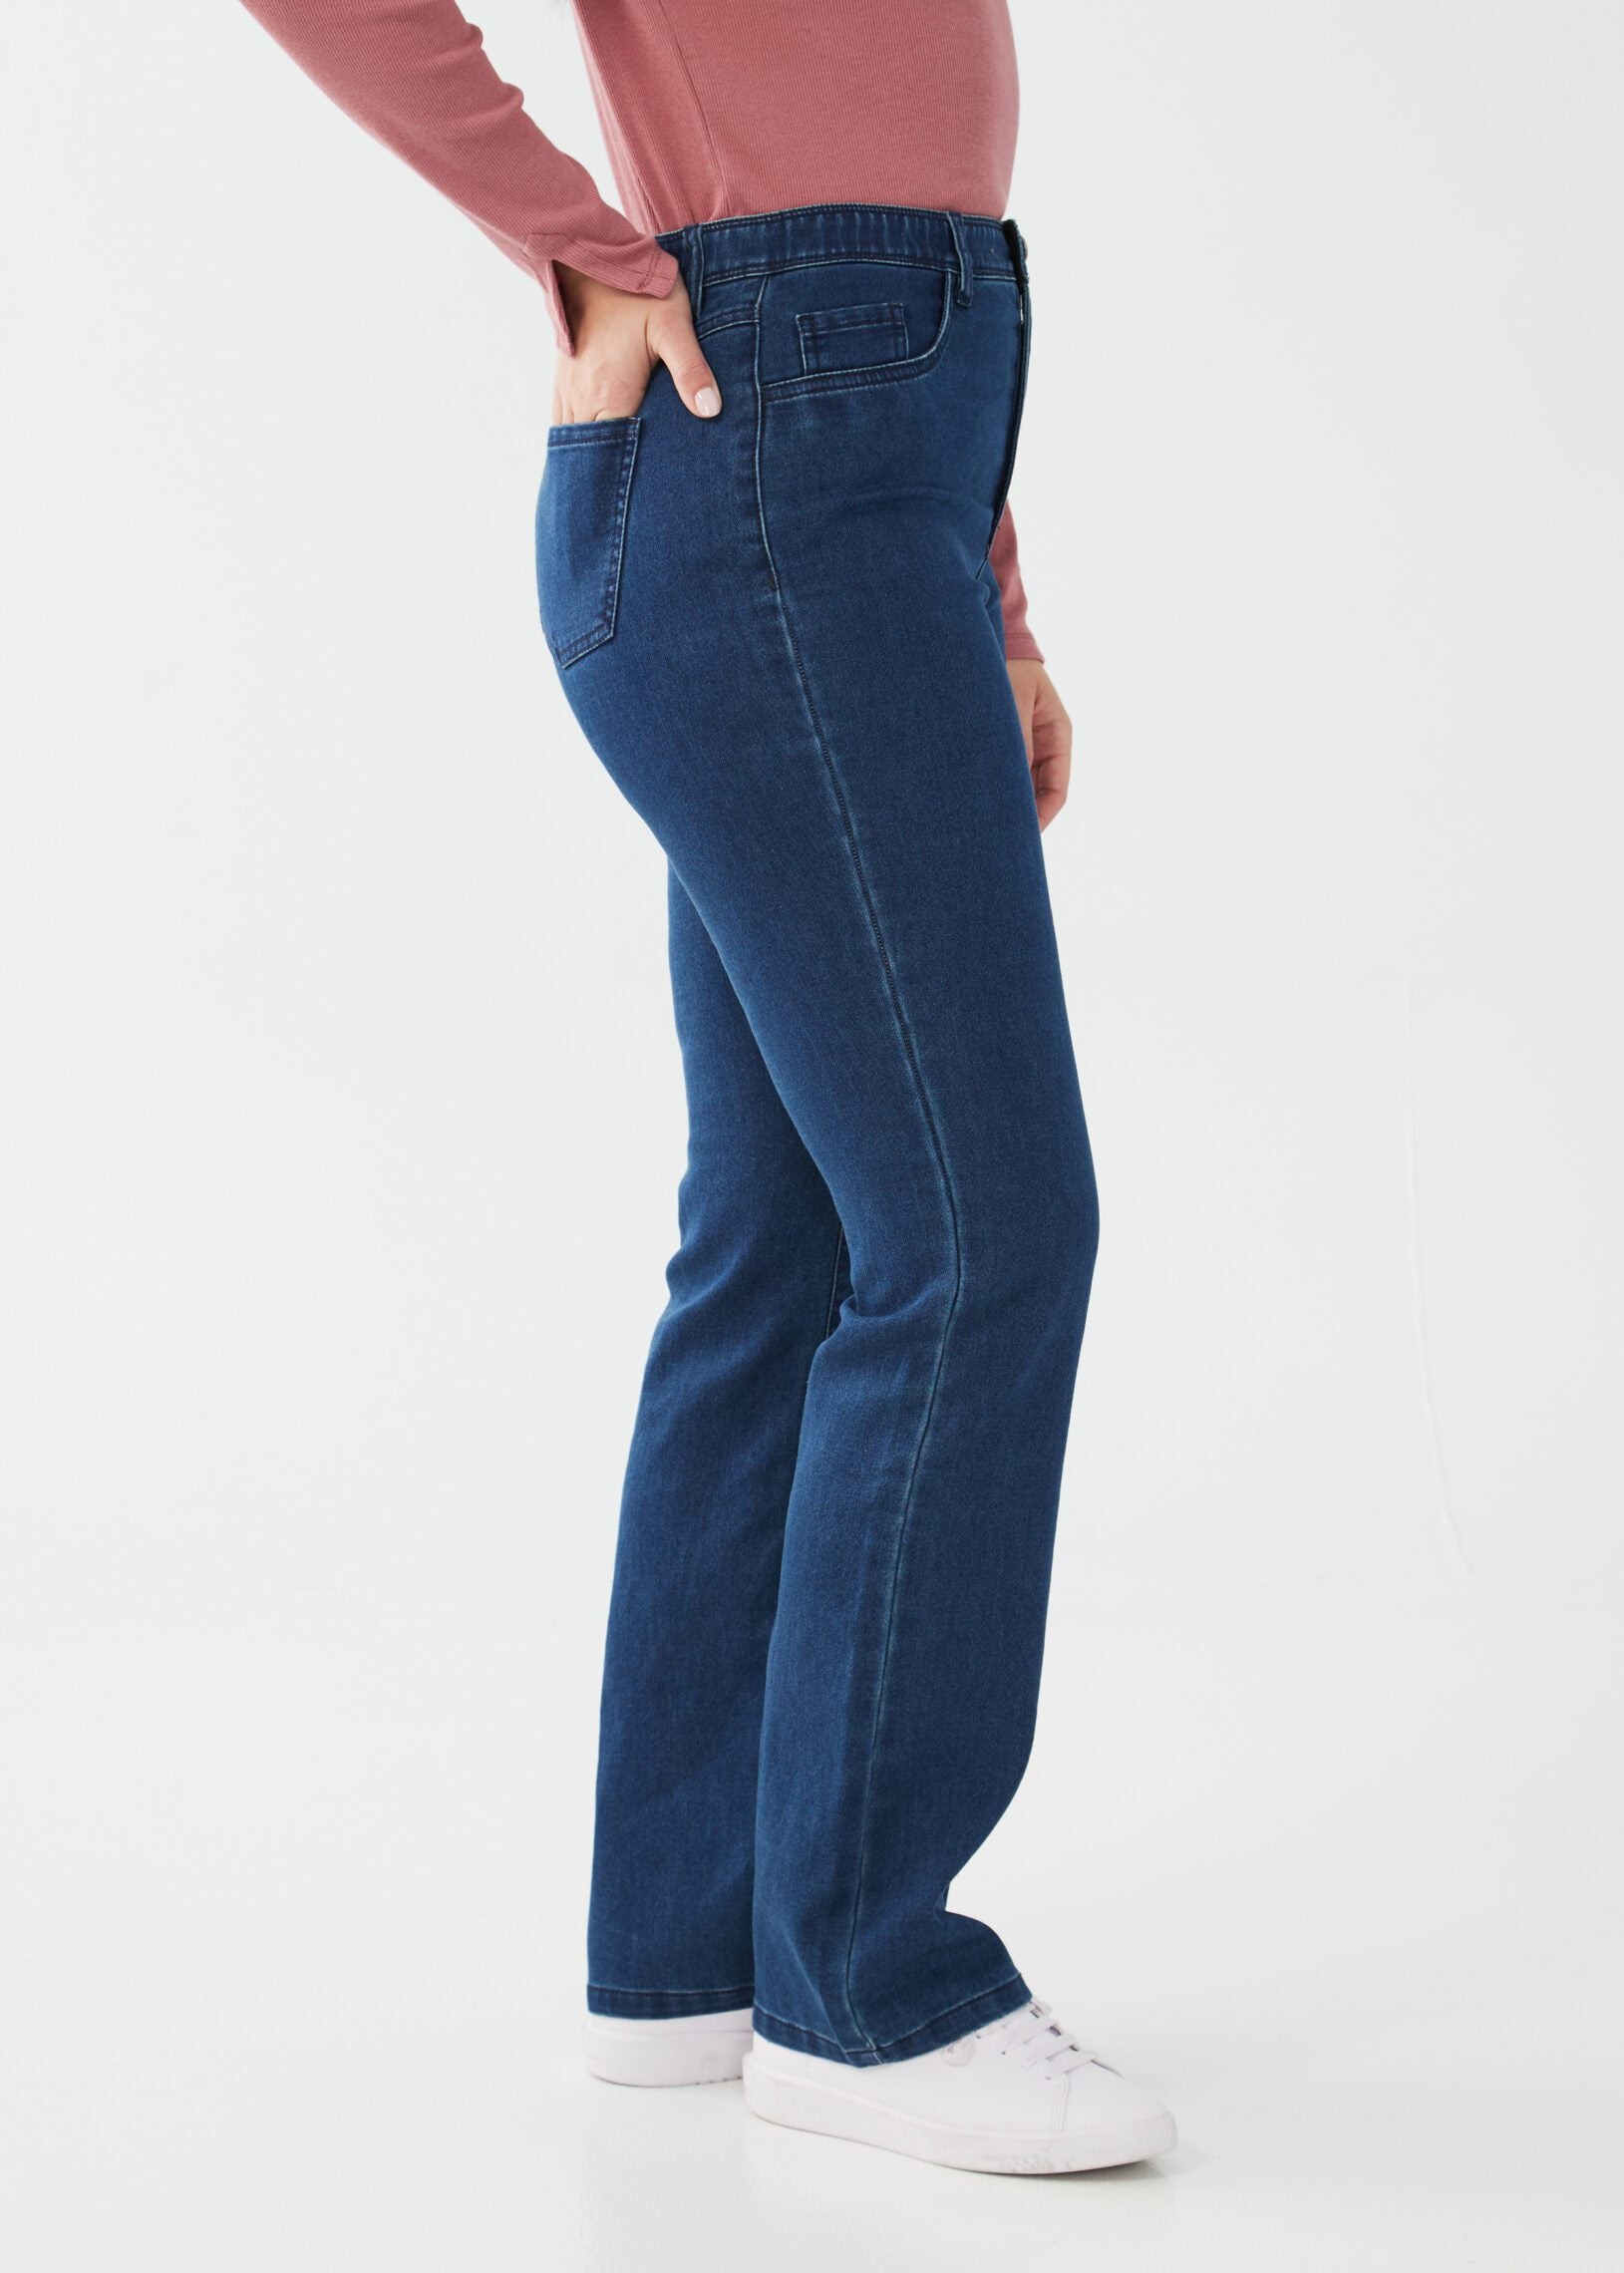 The Suzanne Bootleg Denim is a timeless and classic pair of jeans that brings sophistication and flair to your wardrobe.